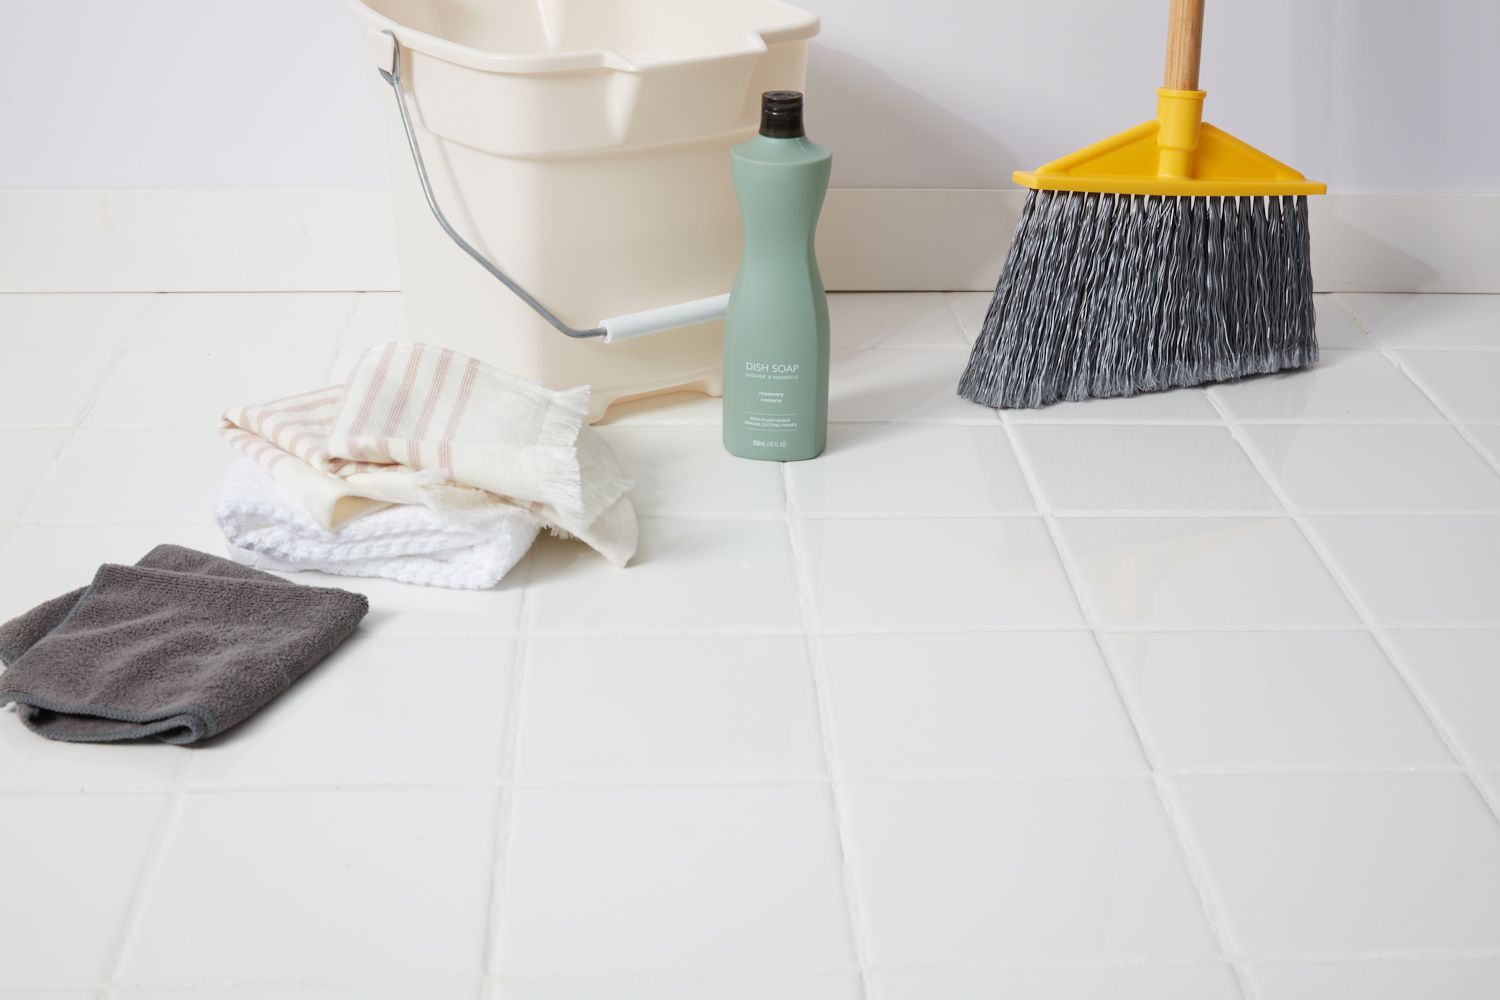 Best Guide About How To Clean Porcelain Tiles 100% Work